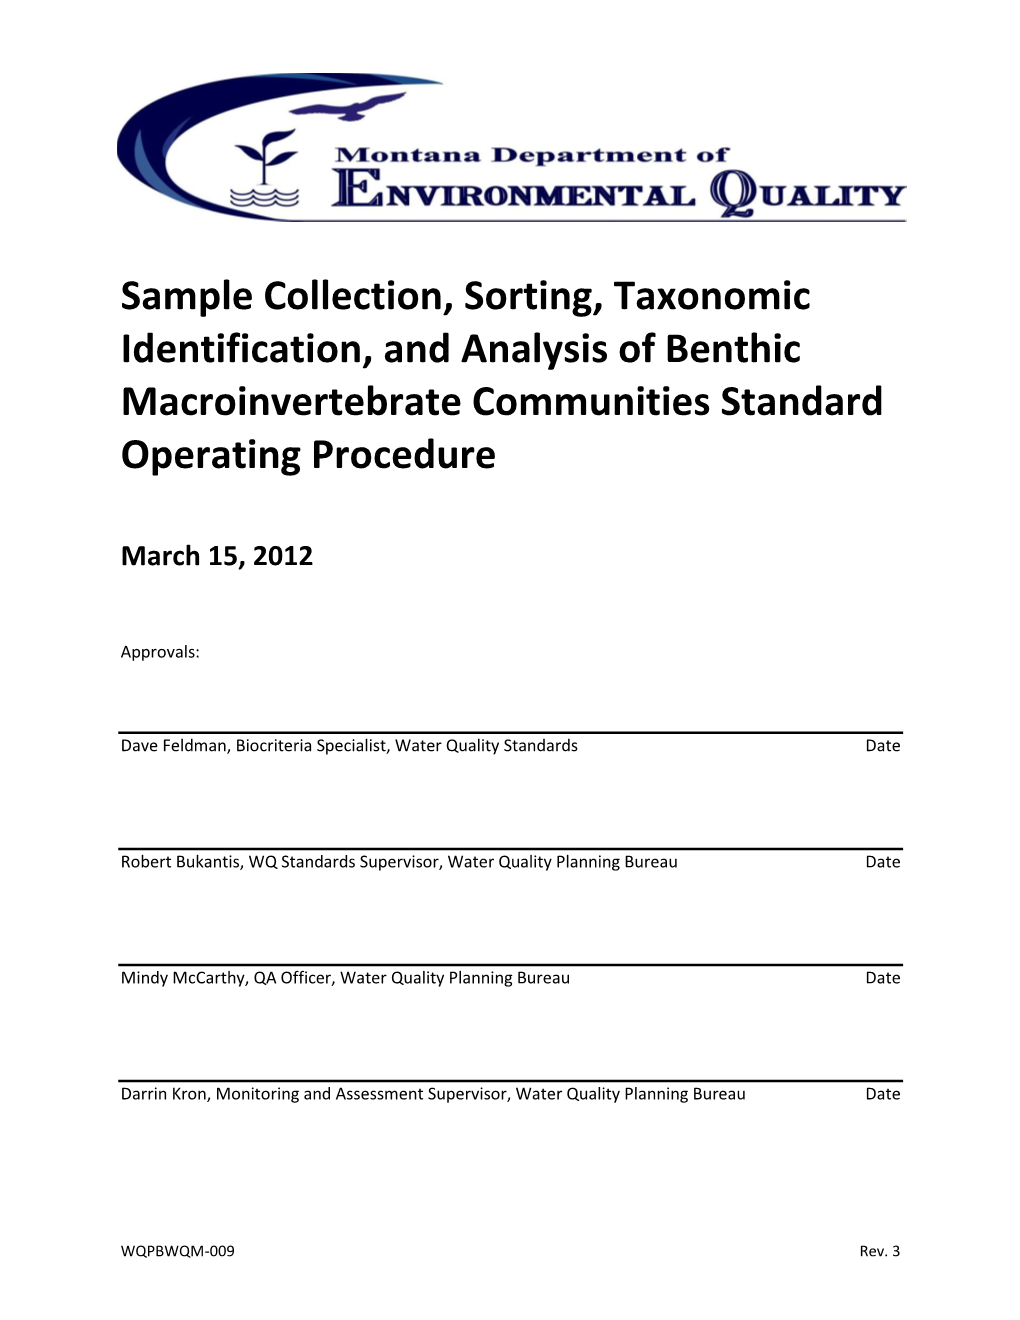 Sample Collection, Sorting, Taxonomic Identification, and Analysis of Benthic Macroinvertebrate Communities Standard Operating Procedure